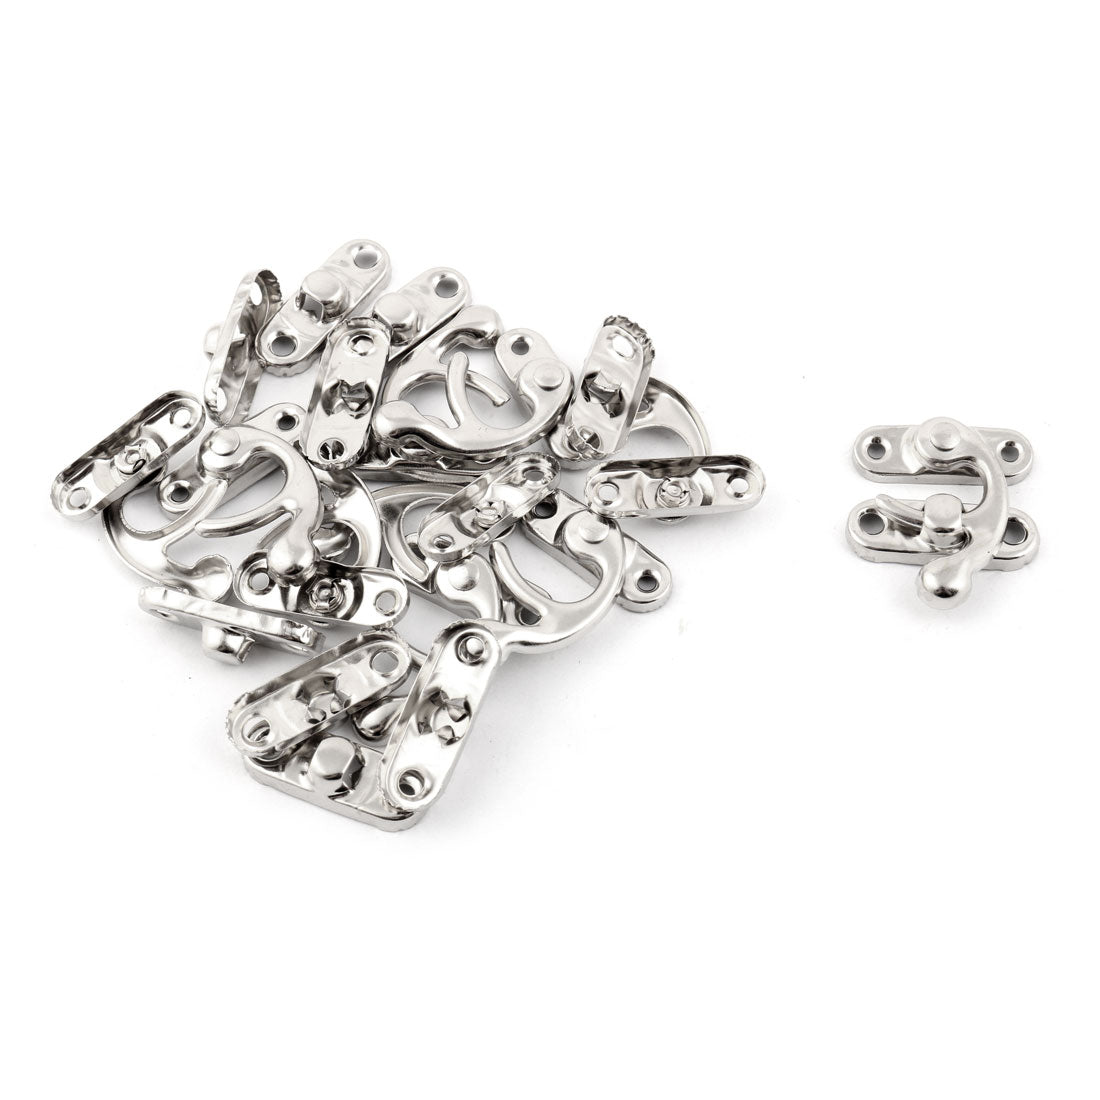 uxcell Uxcell Metal Swing Bag Chest Suitcase Lock Clasp Closure Hasp Box Latch Silver Tone 10pcs